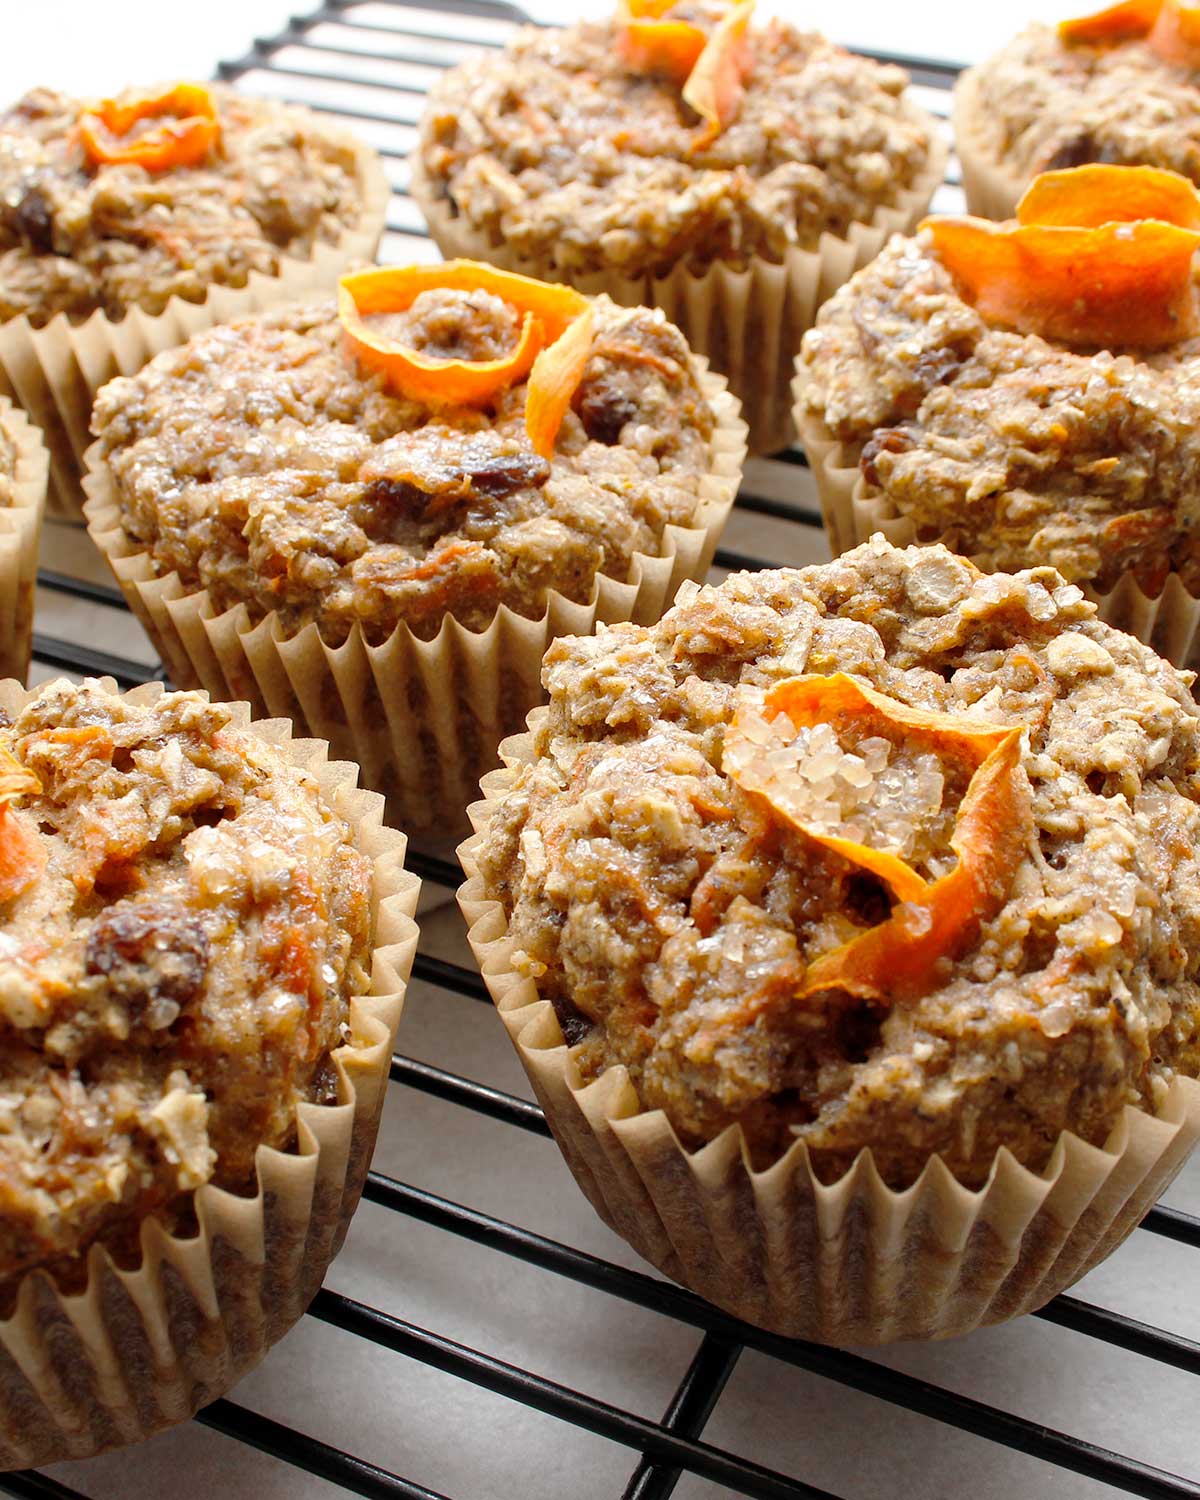 Gluten-free, vegan and allergen-friendly healthy morning glory muffins by Fresh is Real.